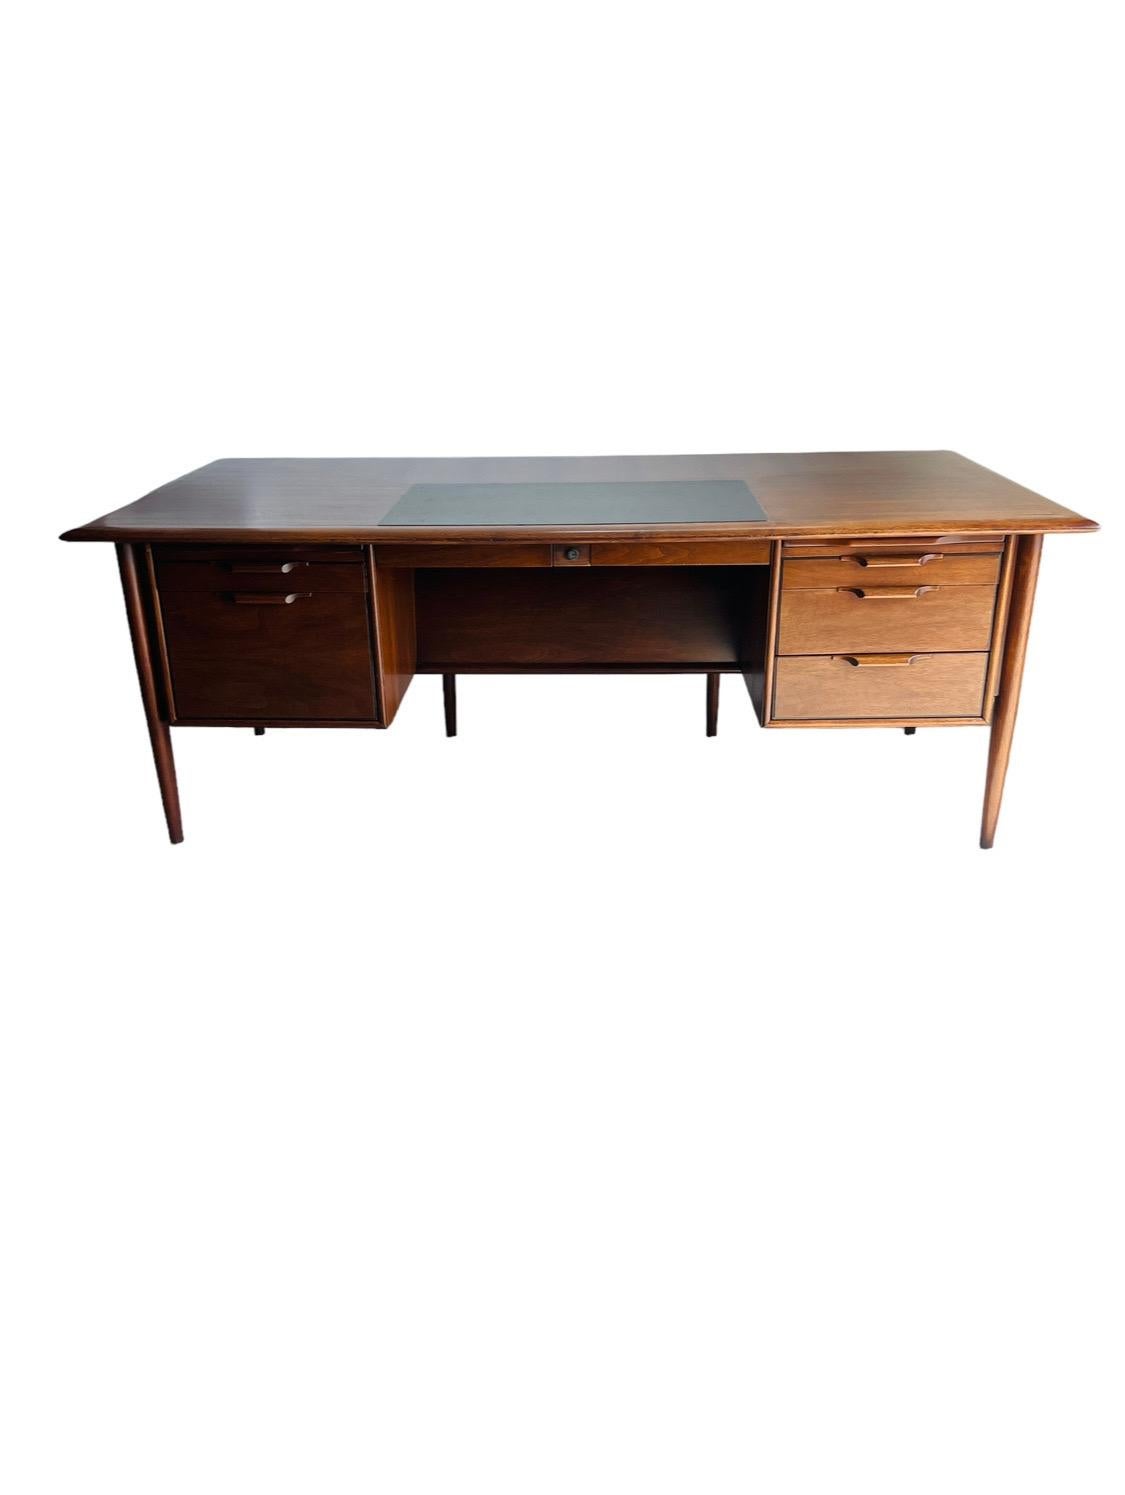 Introducing the Castillian Alma Executive Desk - a pinnacle of mid-century modern design that combines functionality with understated elegance. Crafted from rich walnut, this desk offers a robust workspace, measuring 78 inches in width, 38 inches in